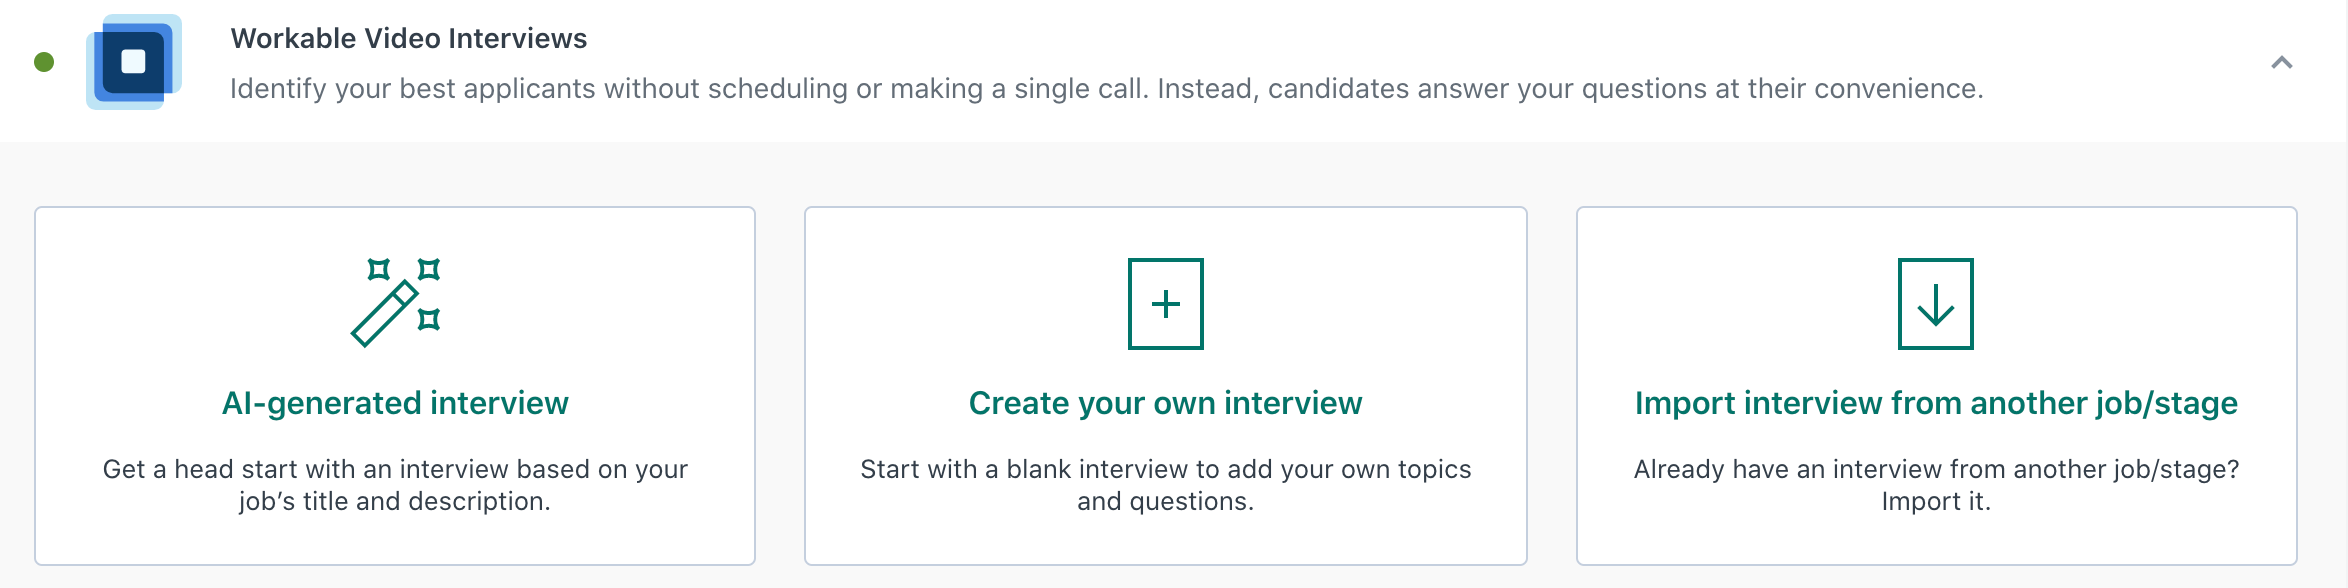 add_video_interview_with_ai.png